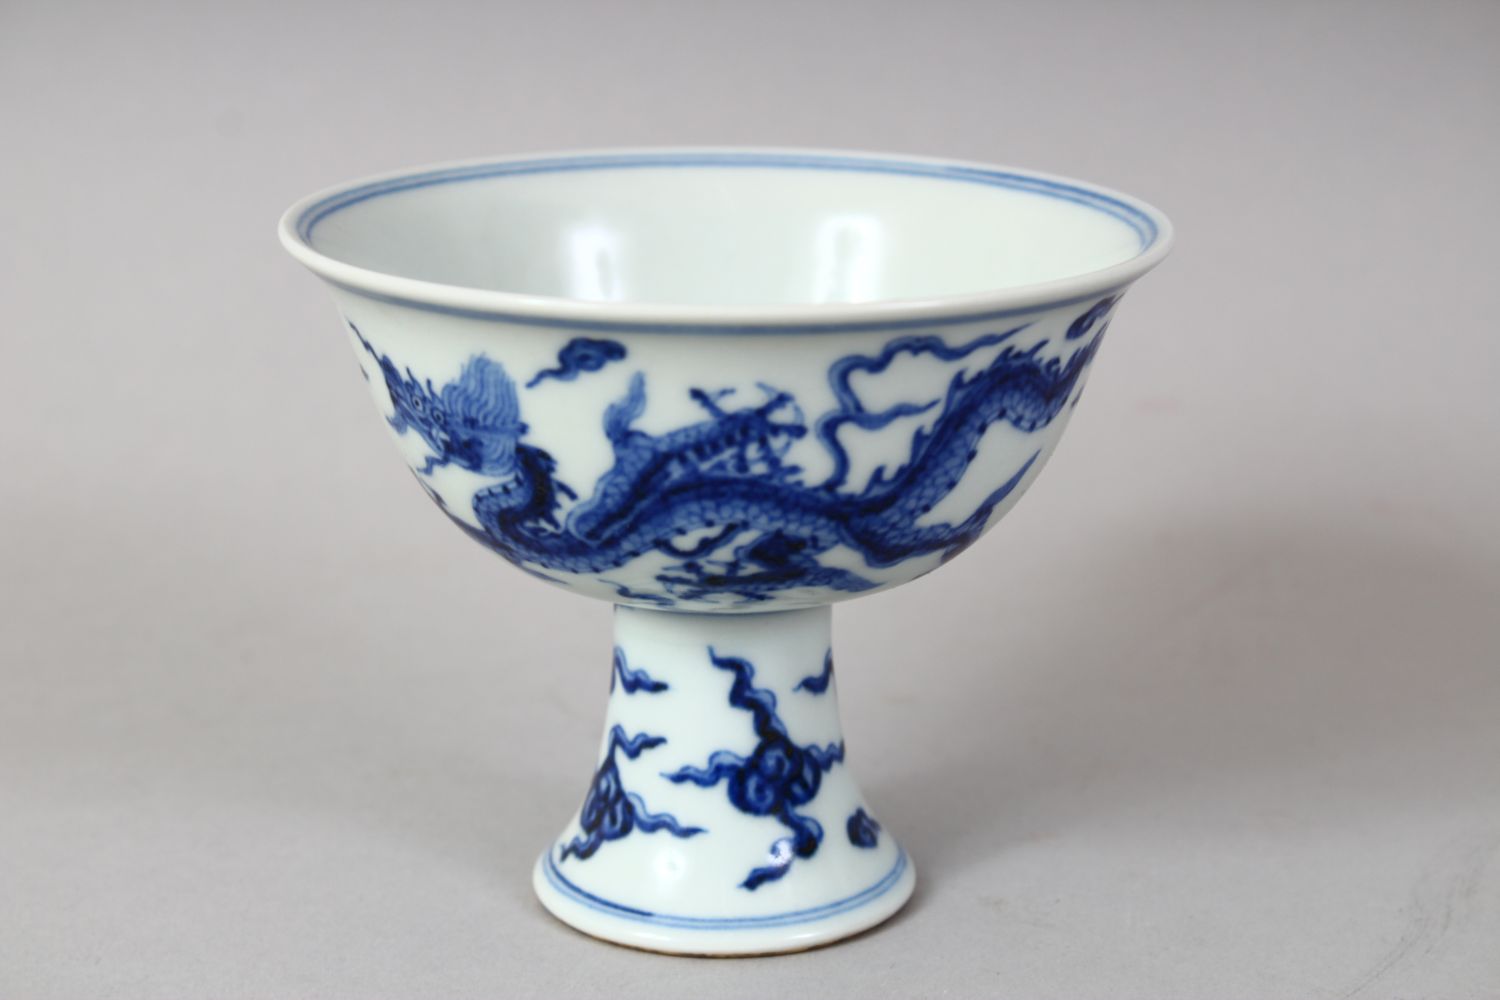 A GOOD CHINESE MING STYLE BLUE & WHITE PORCELAIN STEM CUP, the cup decorated with dragons and - Image 2 of 6